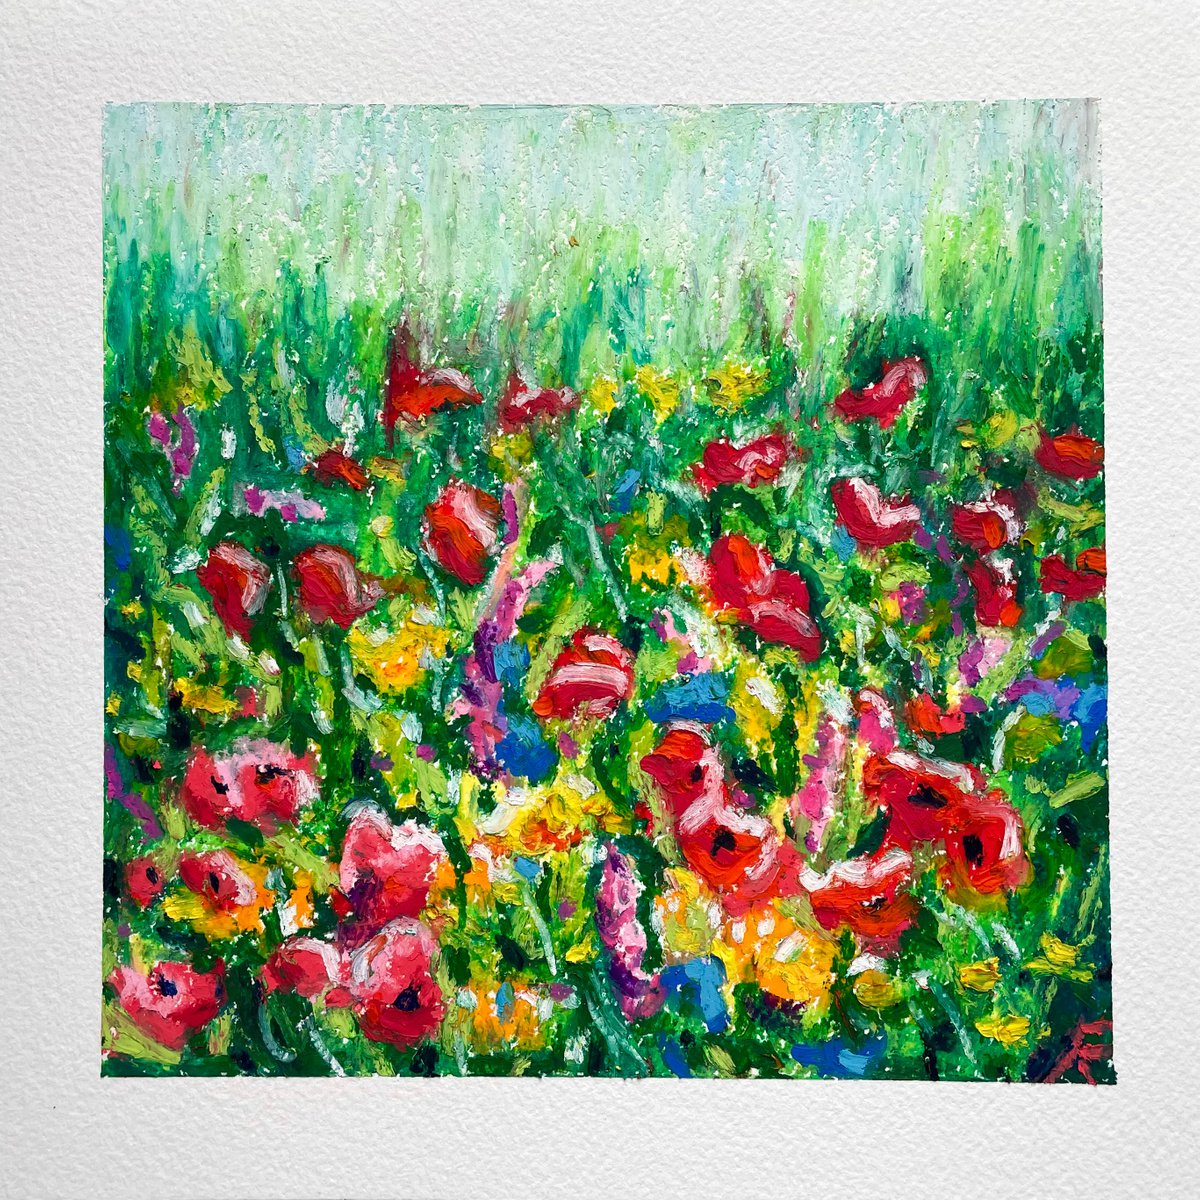 Flowers Original Oil Pastel Painting, Poppy Field Drawing, Cottagecore Decor, Gifts for He... by Kate Grishakova